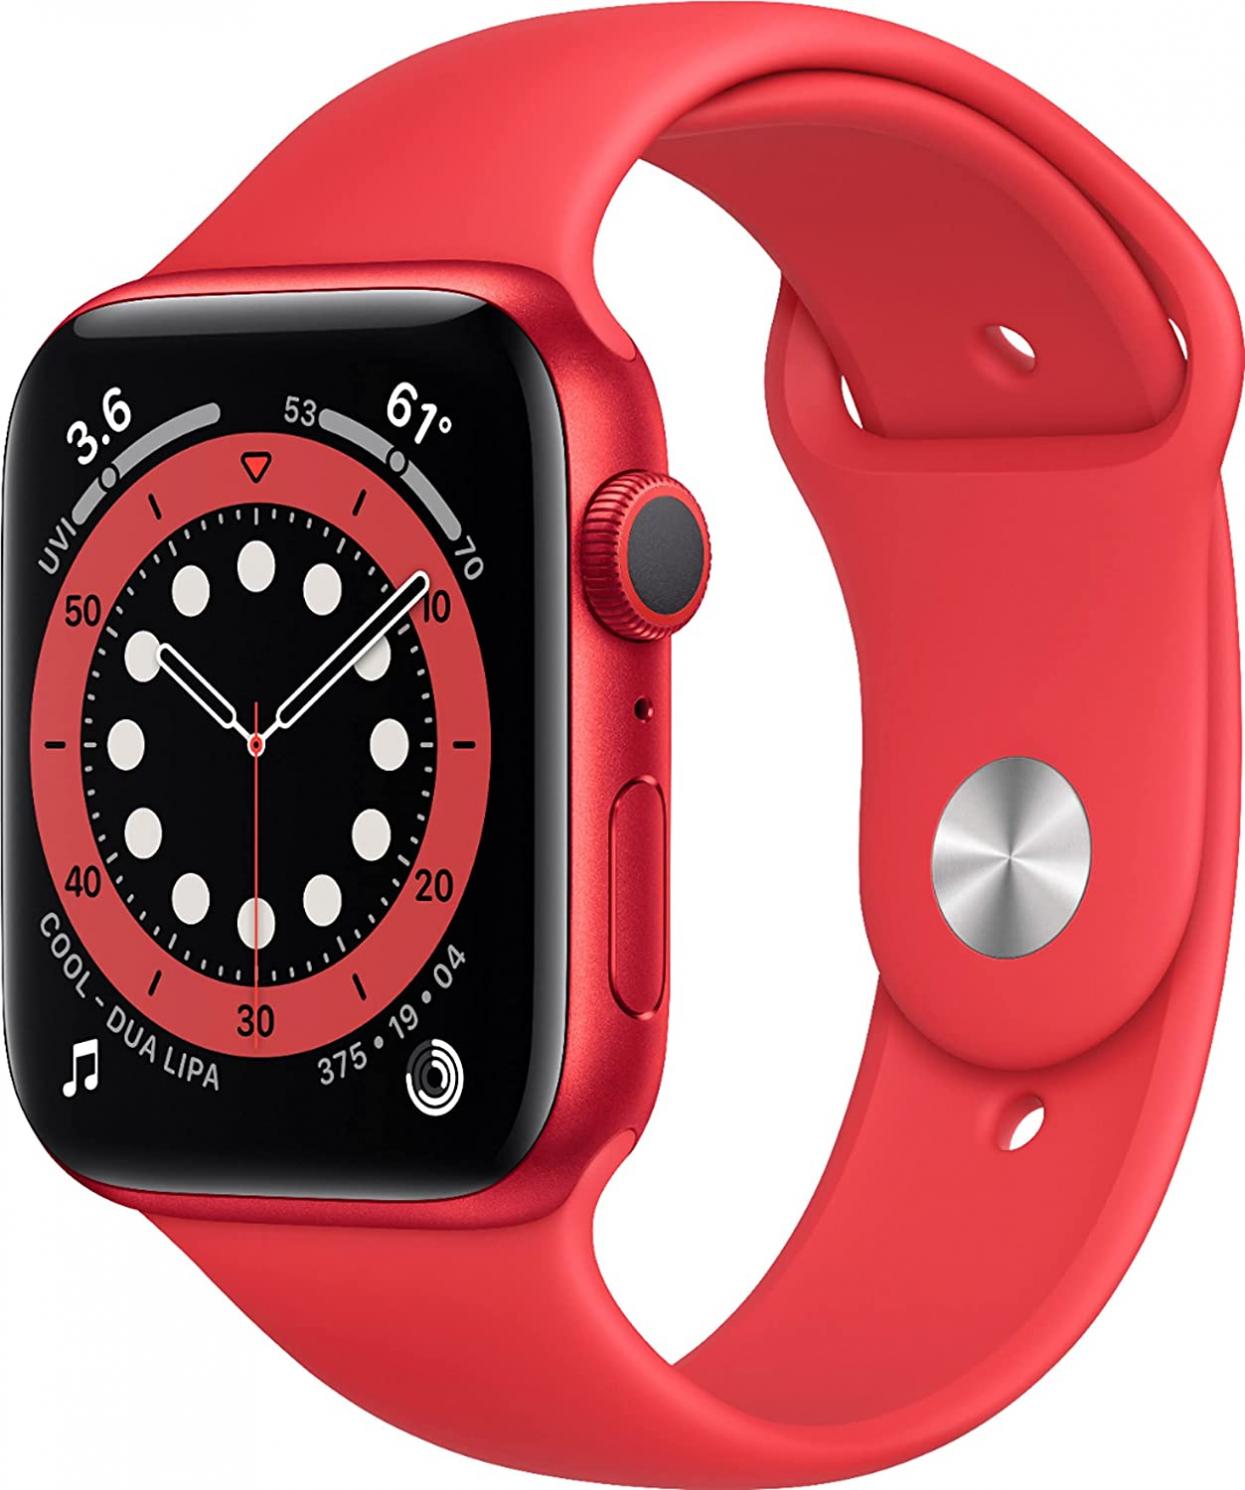 Apple Watch Series 6 (GPS, 40mm) - Red Aluminum Case with Red Sport Band (Renewed Premium)